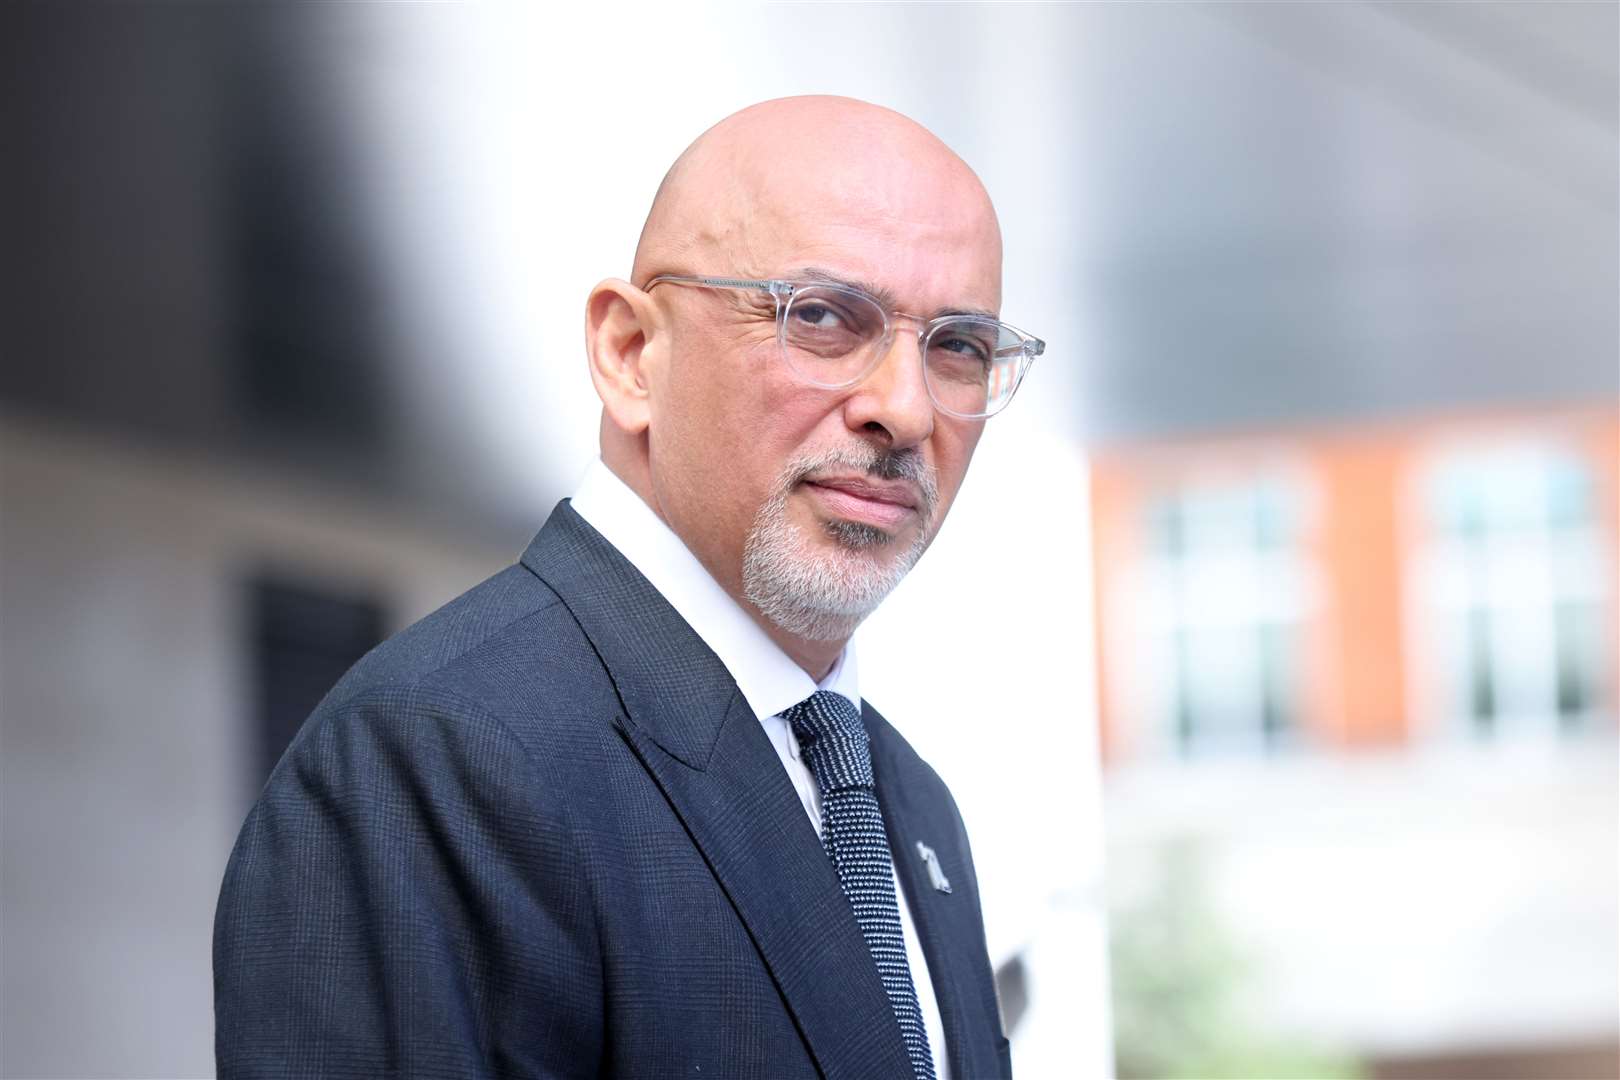 Nadhim Zahawi insisted during a round of broadcast interviews on Sunday that he did not know who called the meeting, or what was discussed (James Manning/PA)